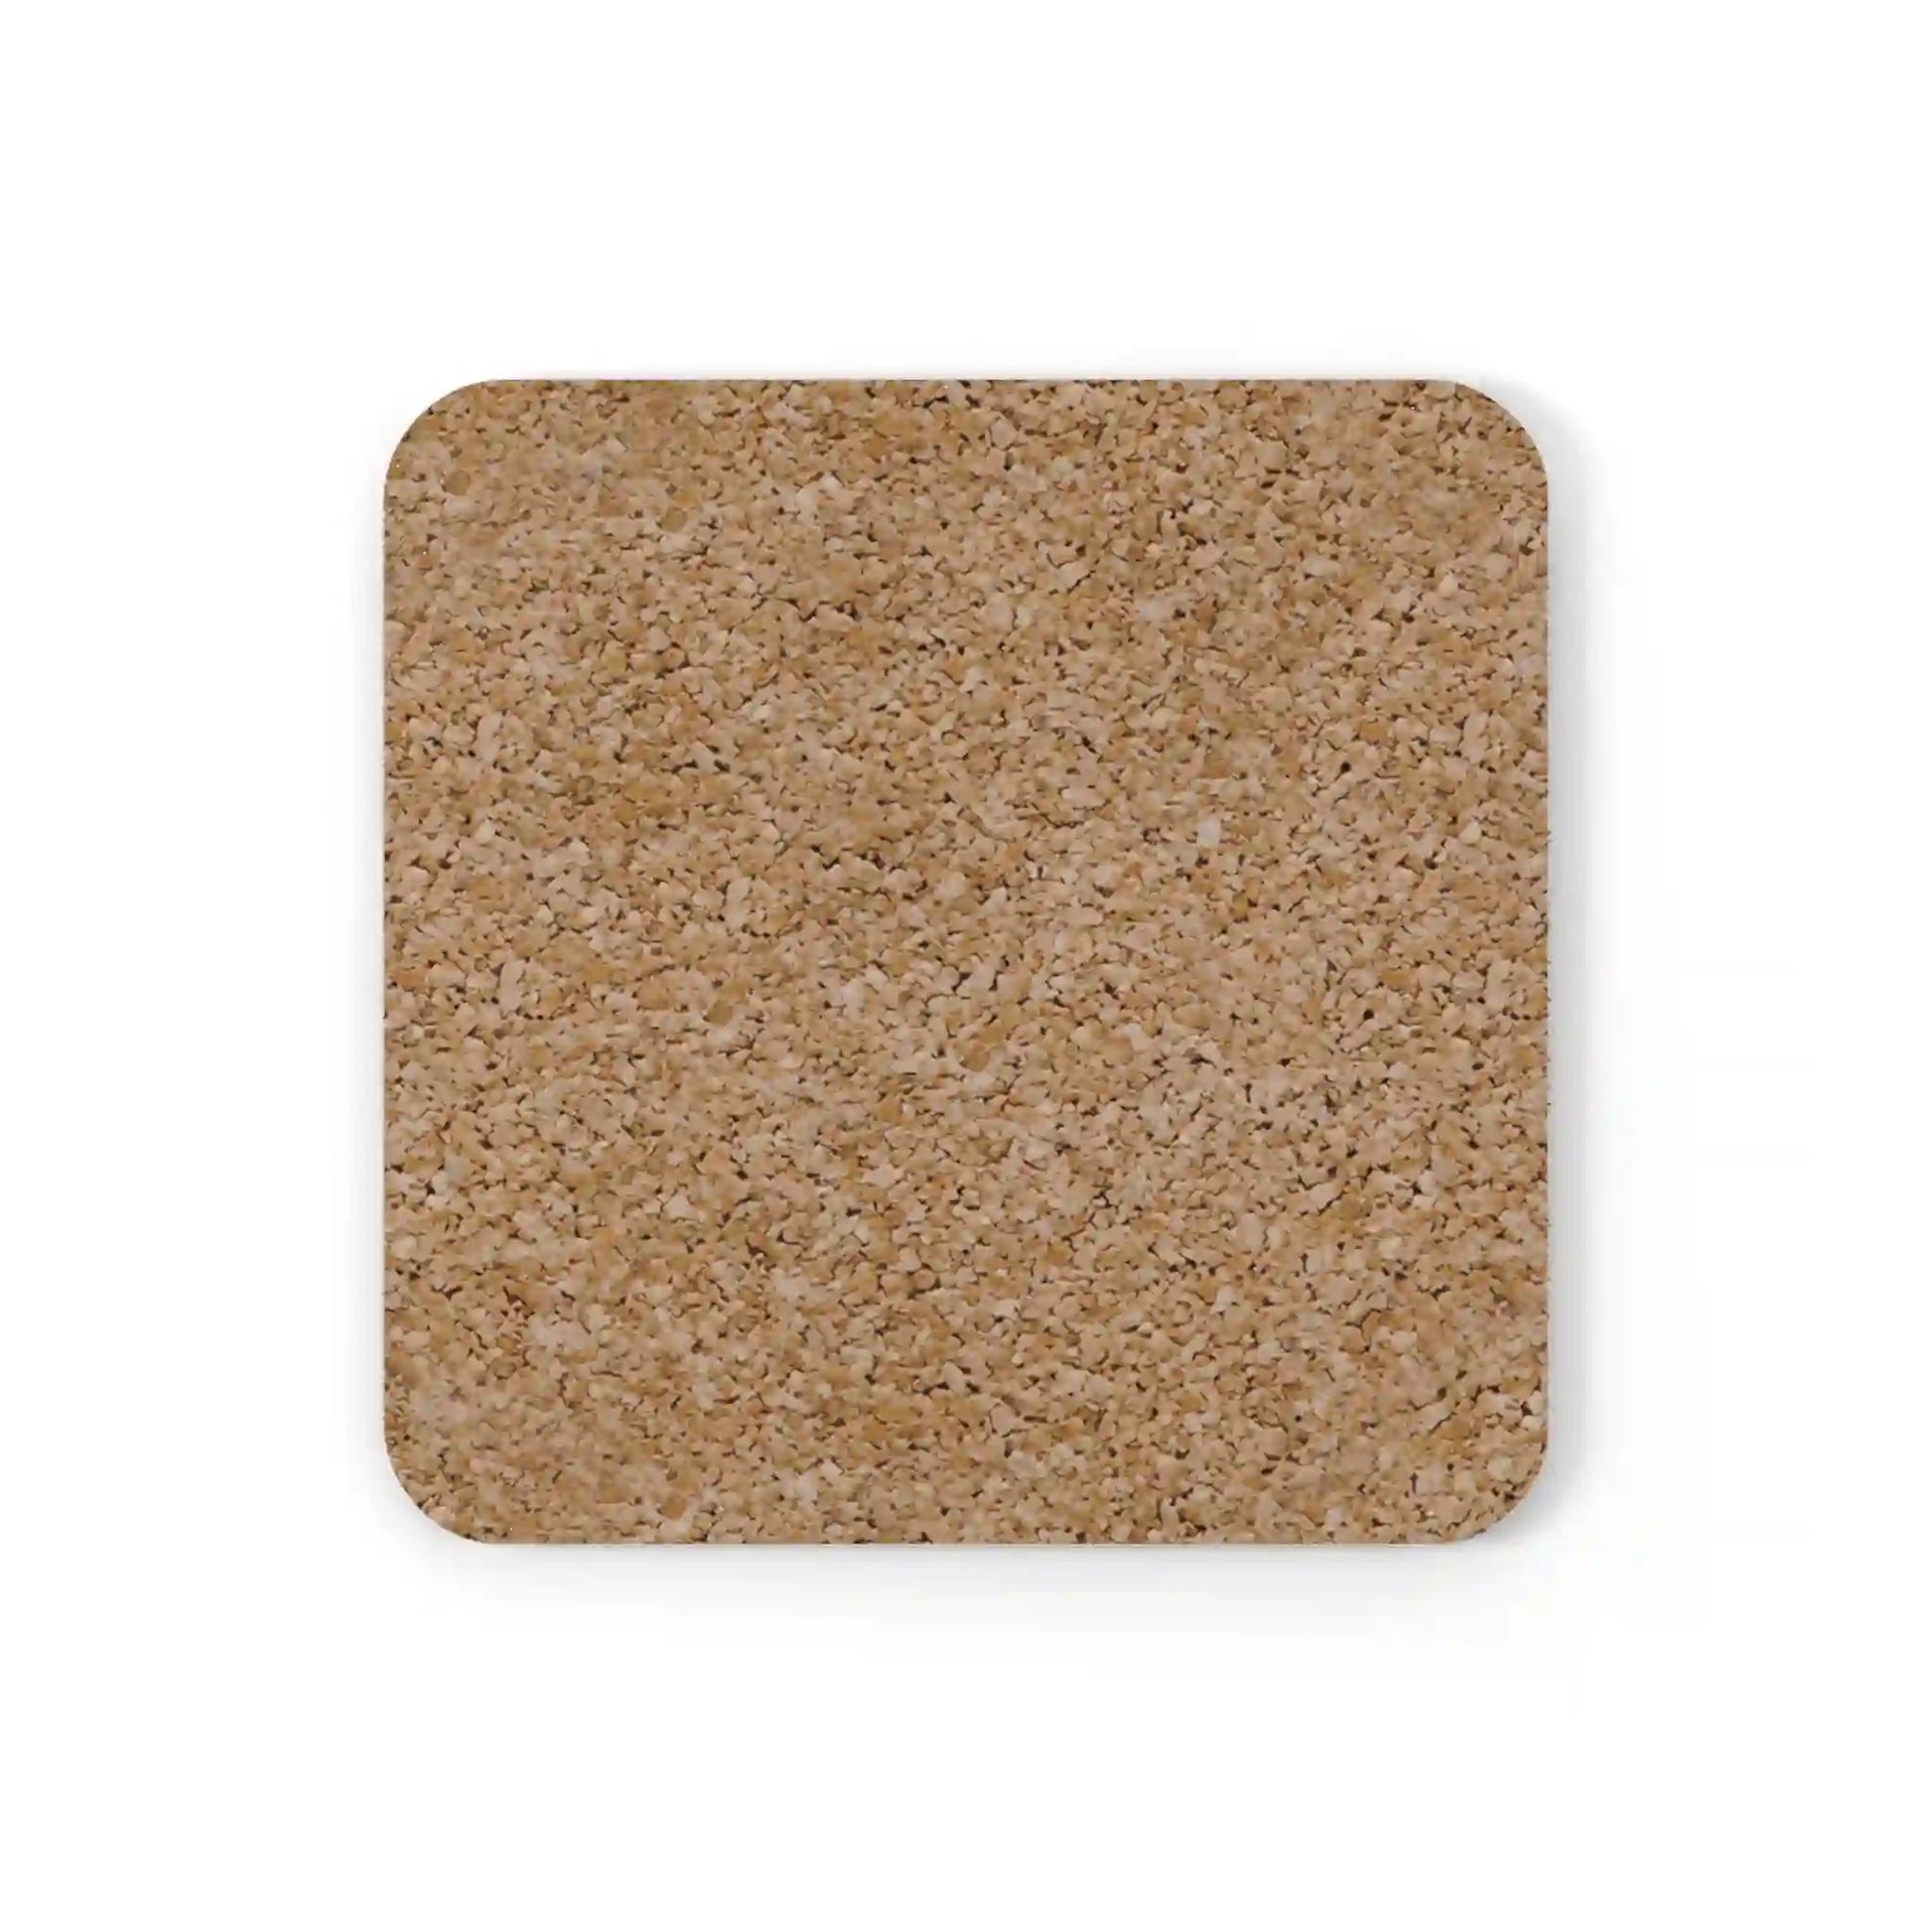 Non-slip premium cork coaster, furniture protection (My body, my choice, my rules)